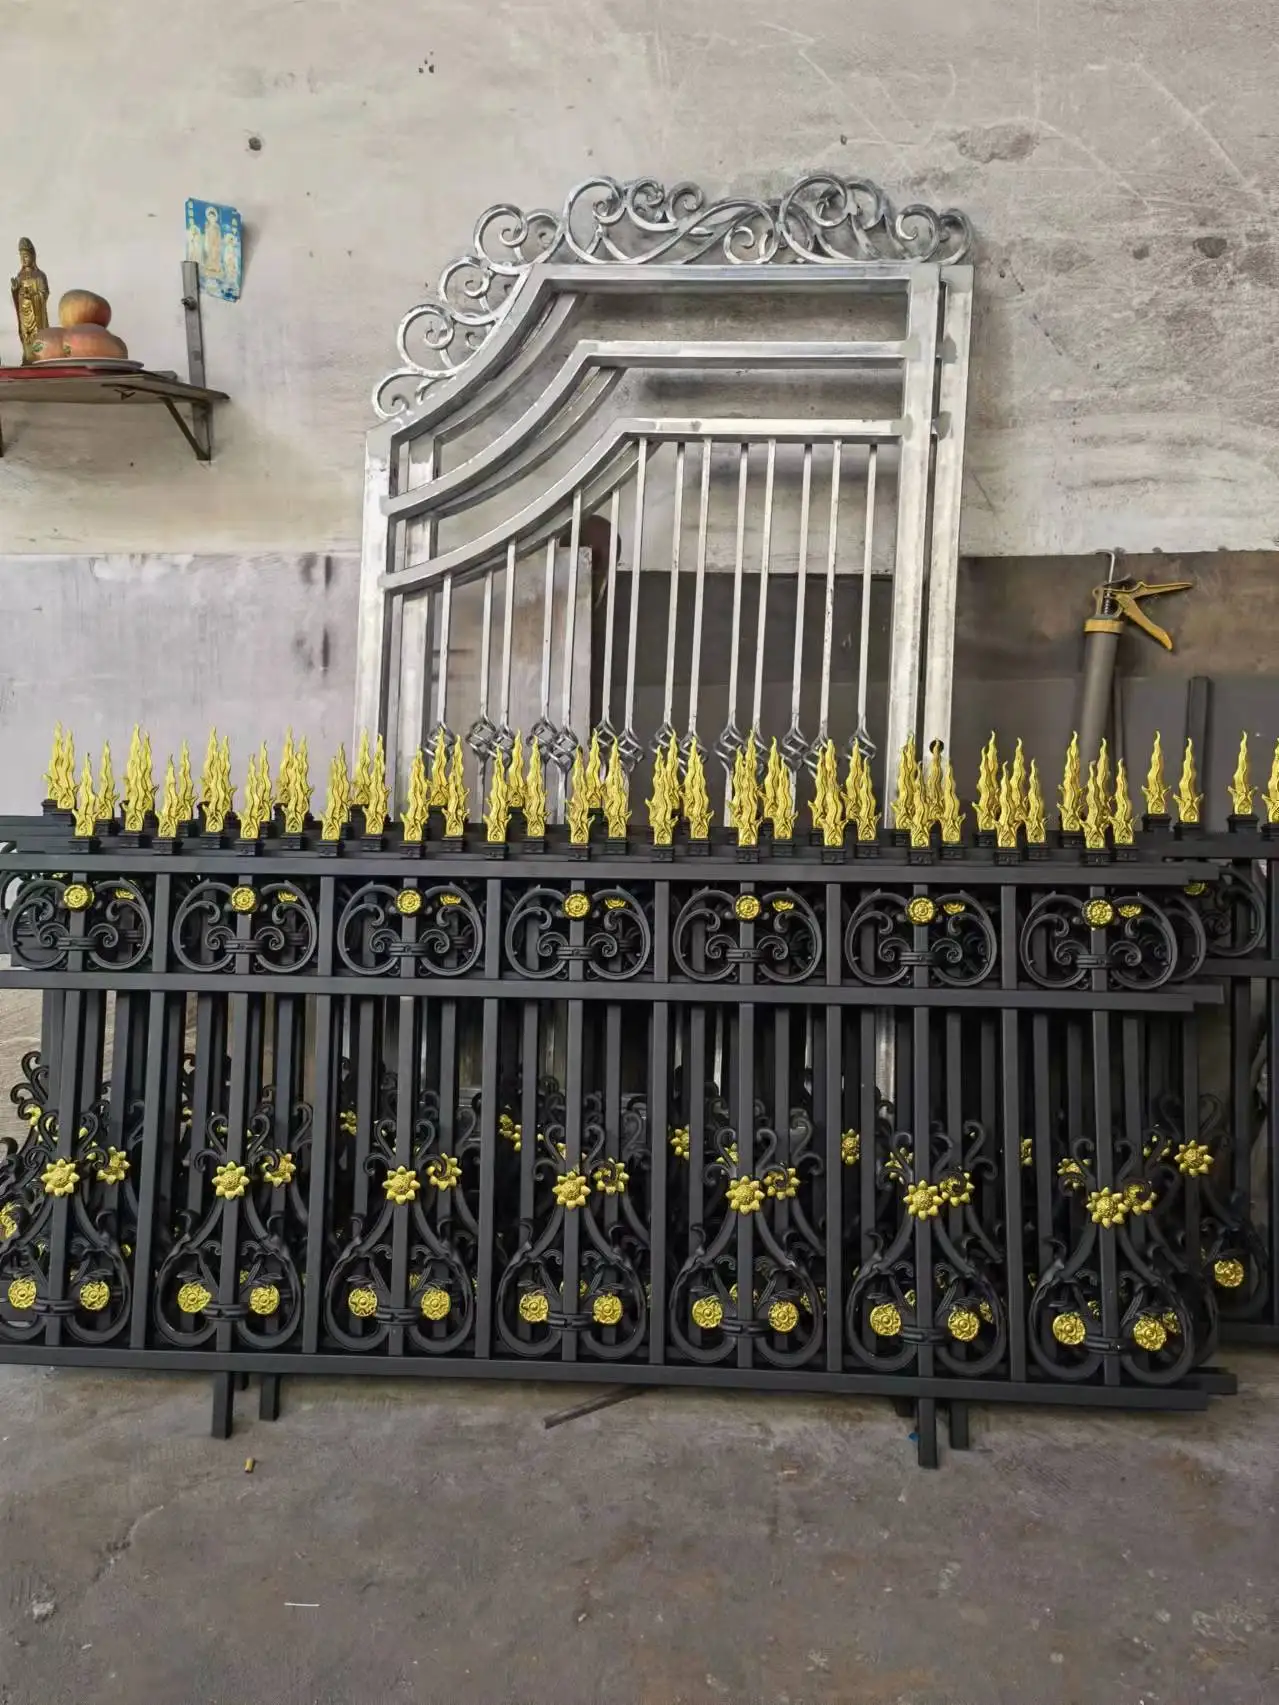 Villa Aluminum Steel Panel Metal Home Garden Fence Country Wrought Iron Gates Designs Wholesale - Fencing, Trellis and Gates